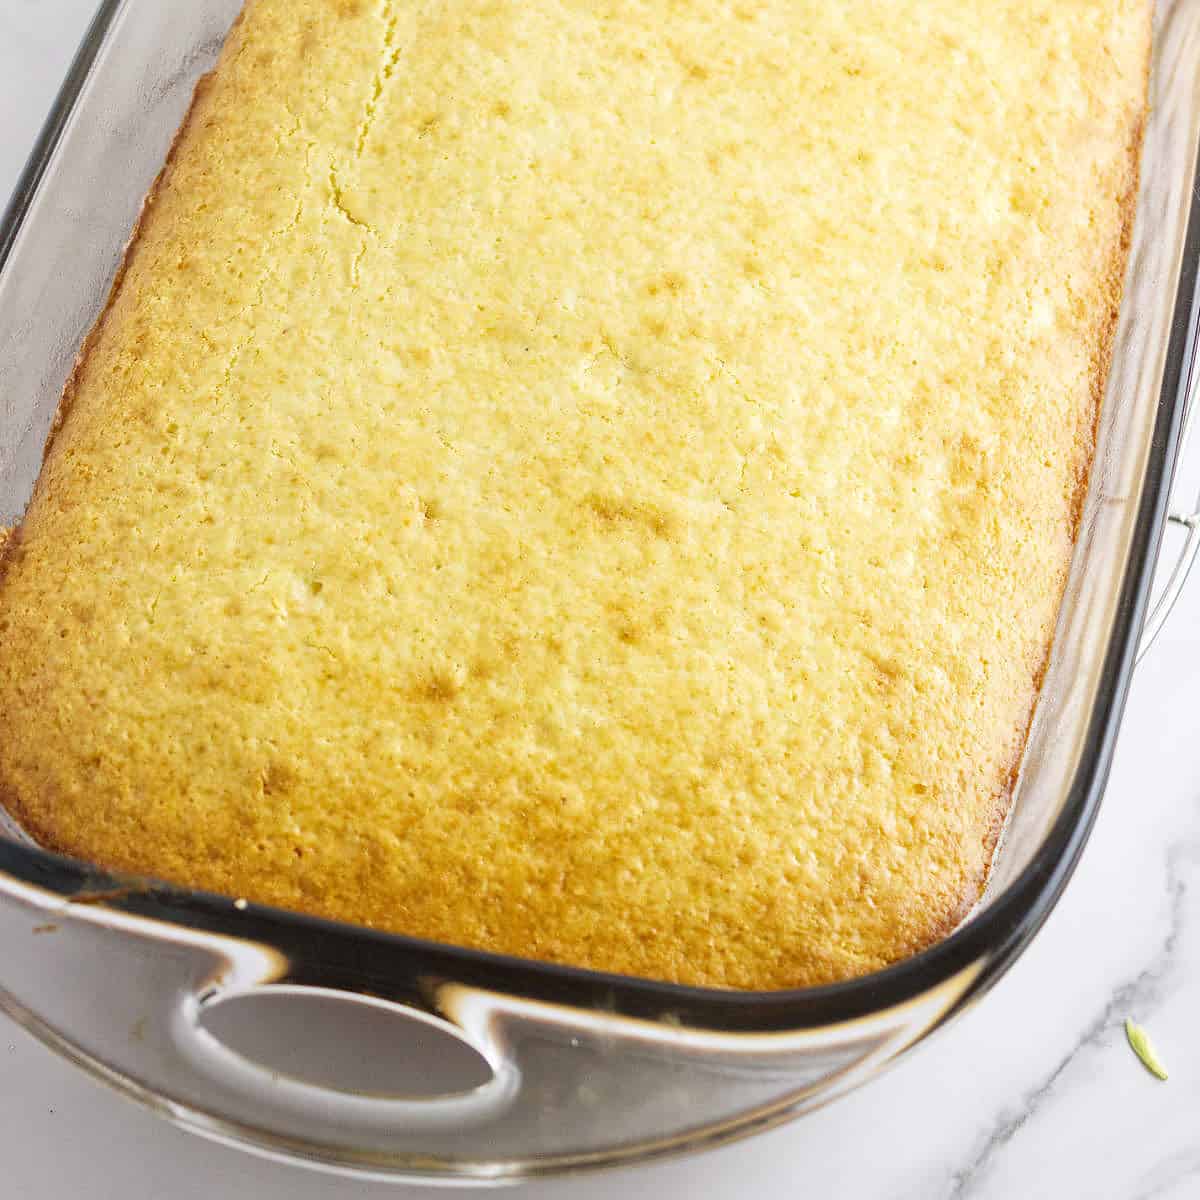 baked cornbread in 9 x 13 pan cooling.